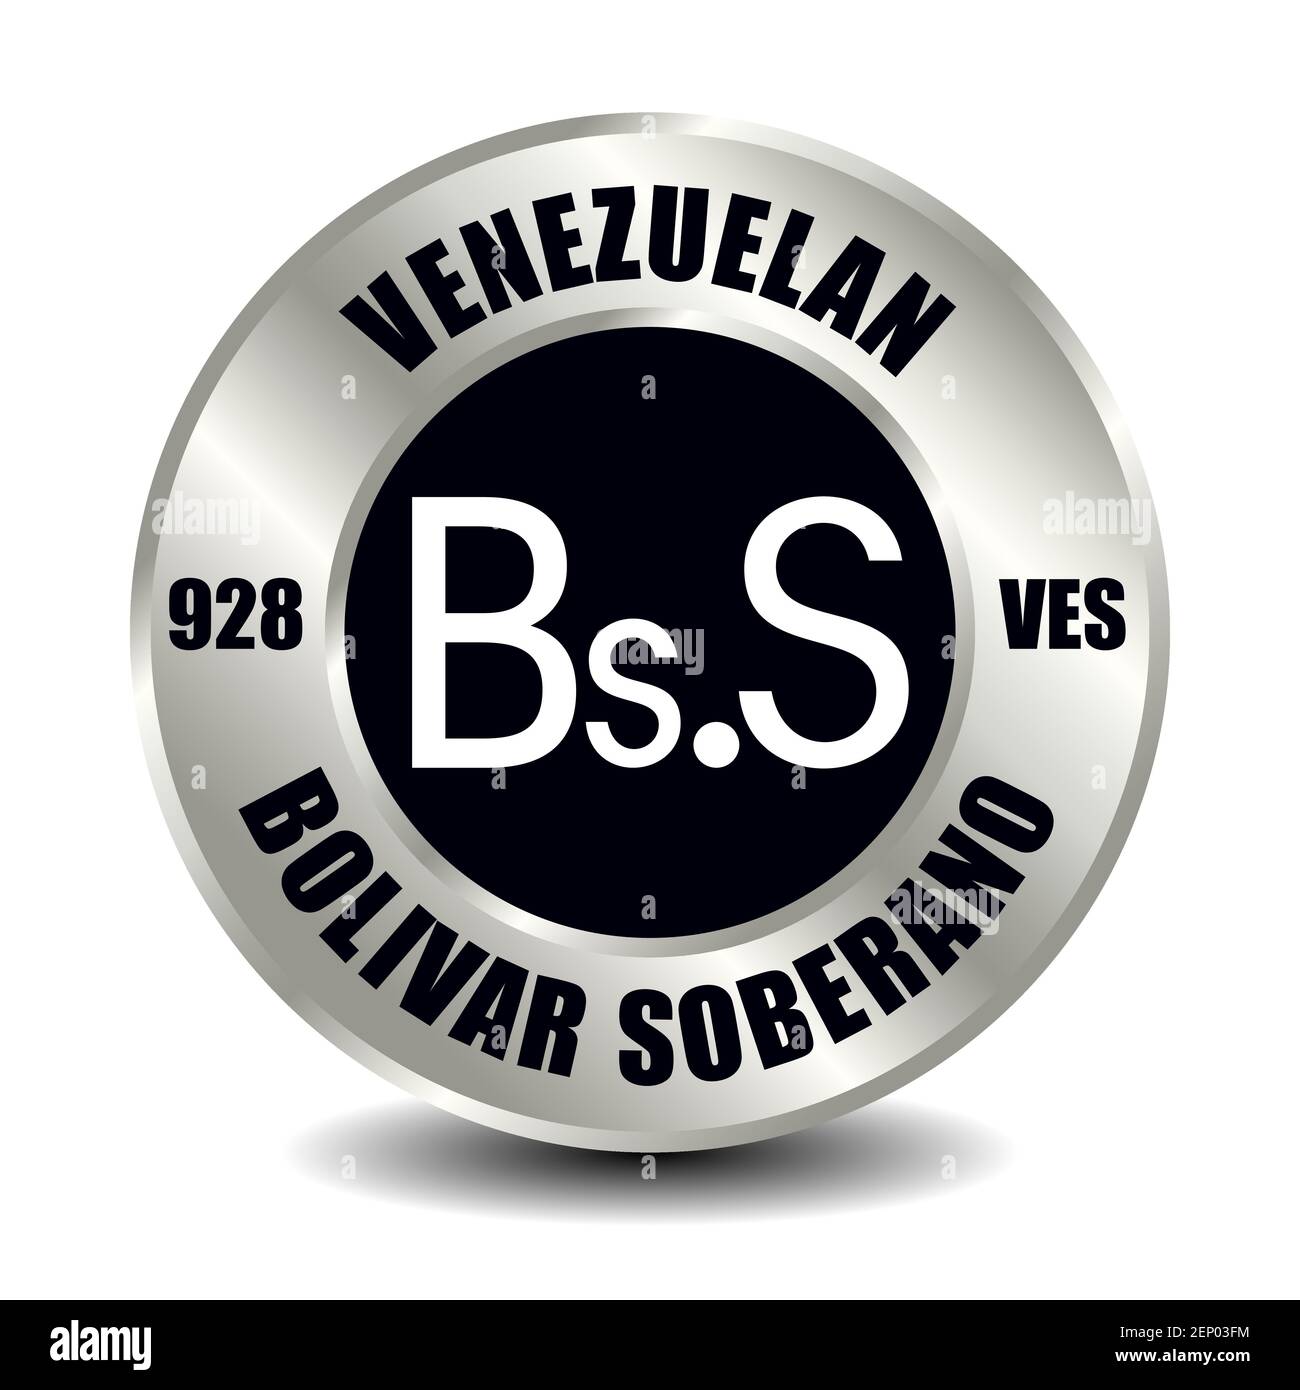 Venezuela money icon isolated on round silver coin. Vector sign of currency symbol with international ISO code and abbreviation Stock Vector